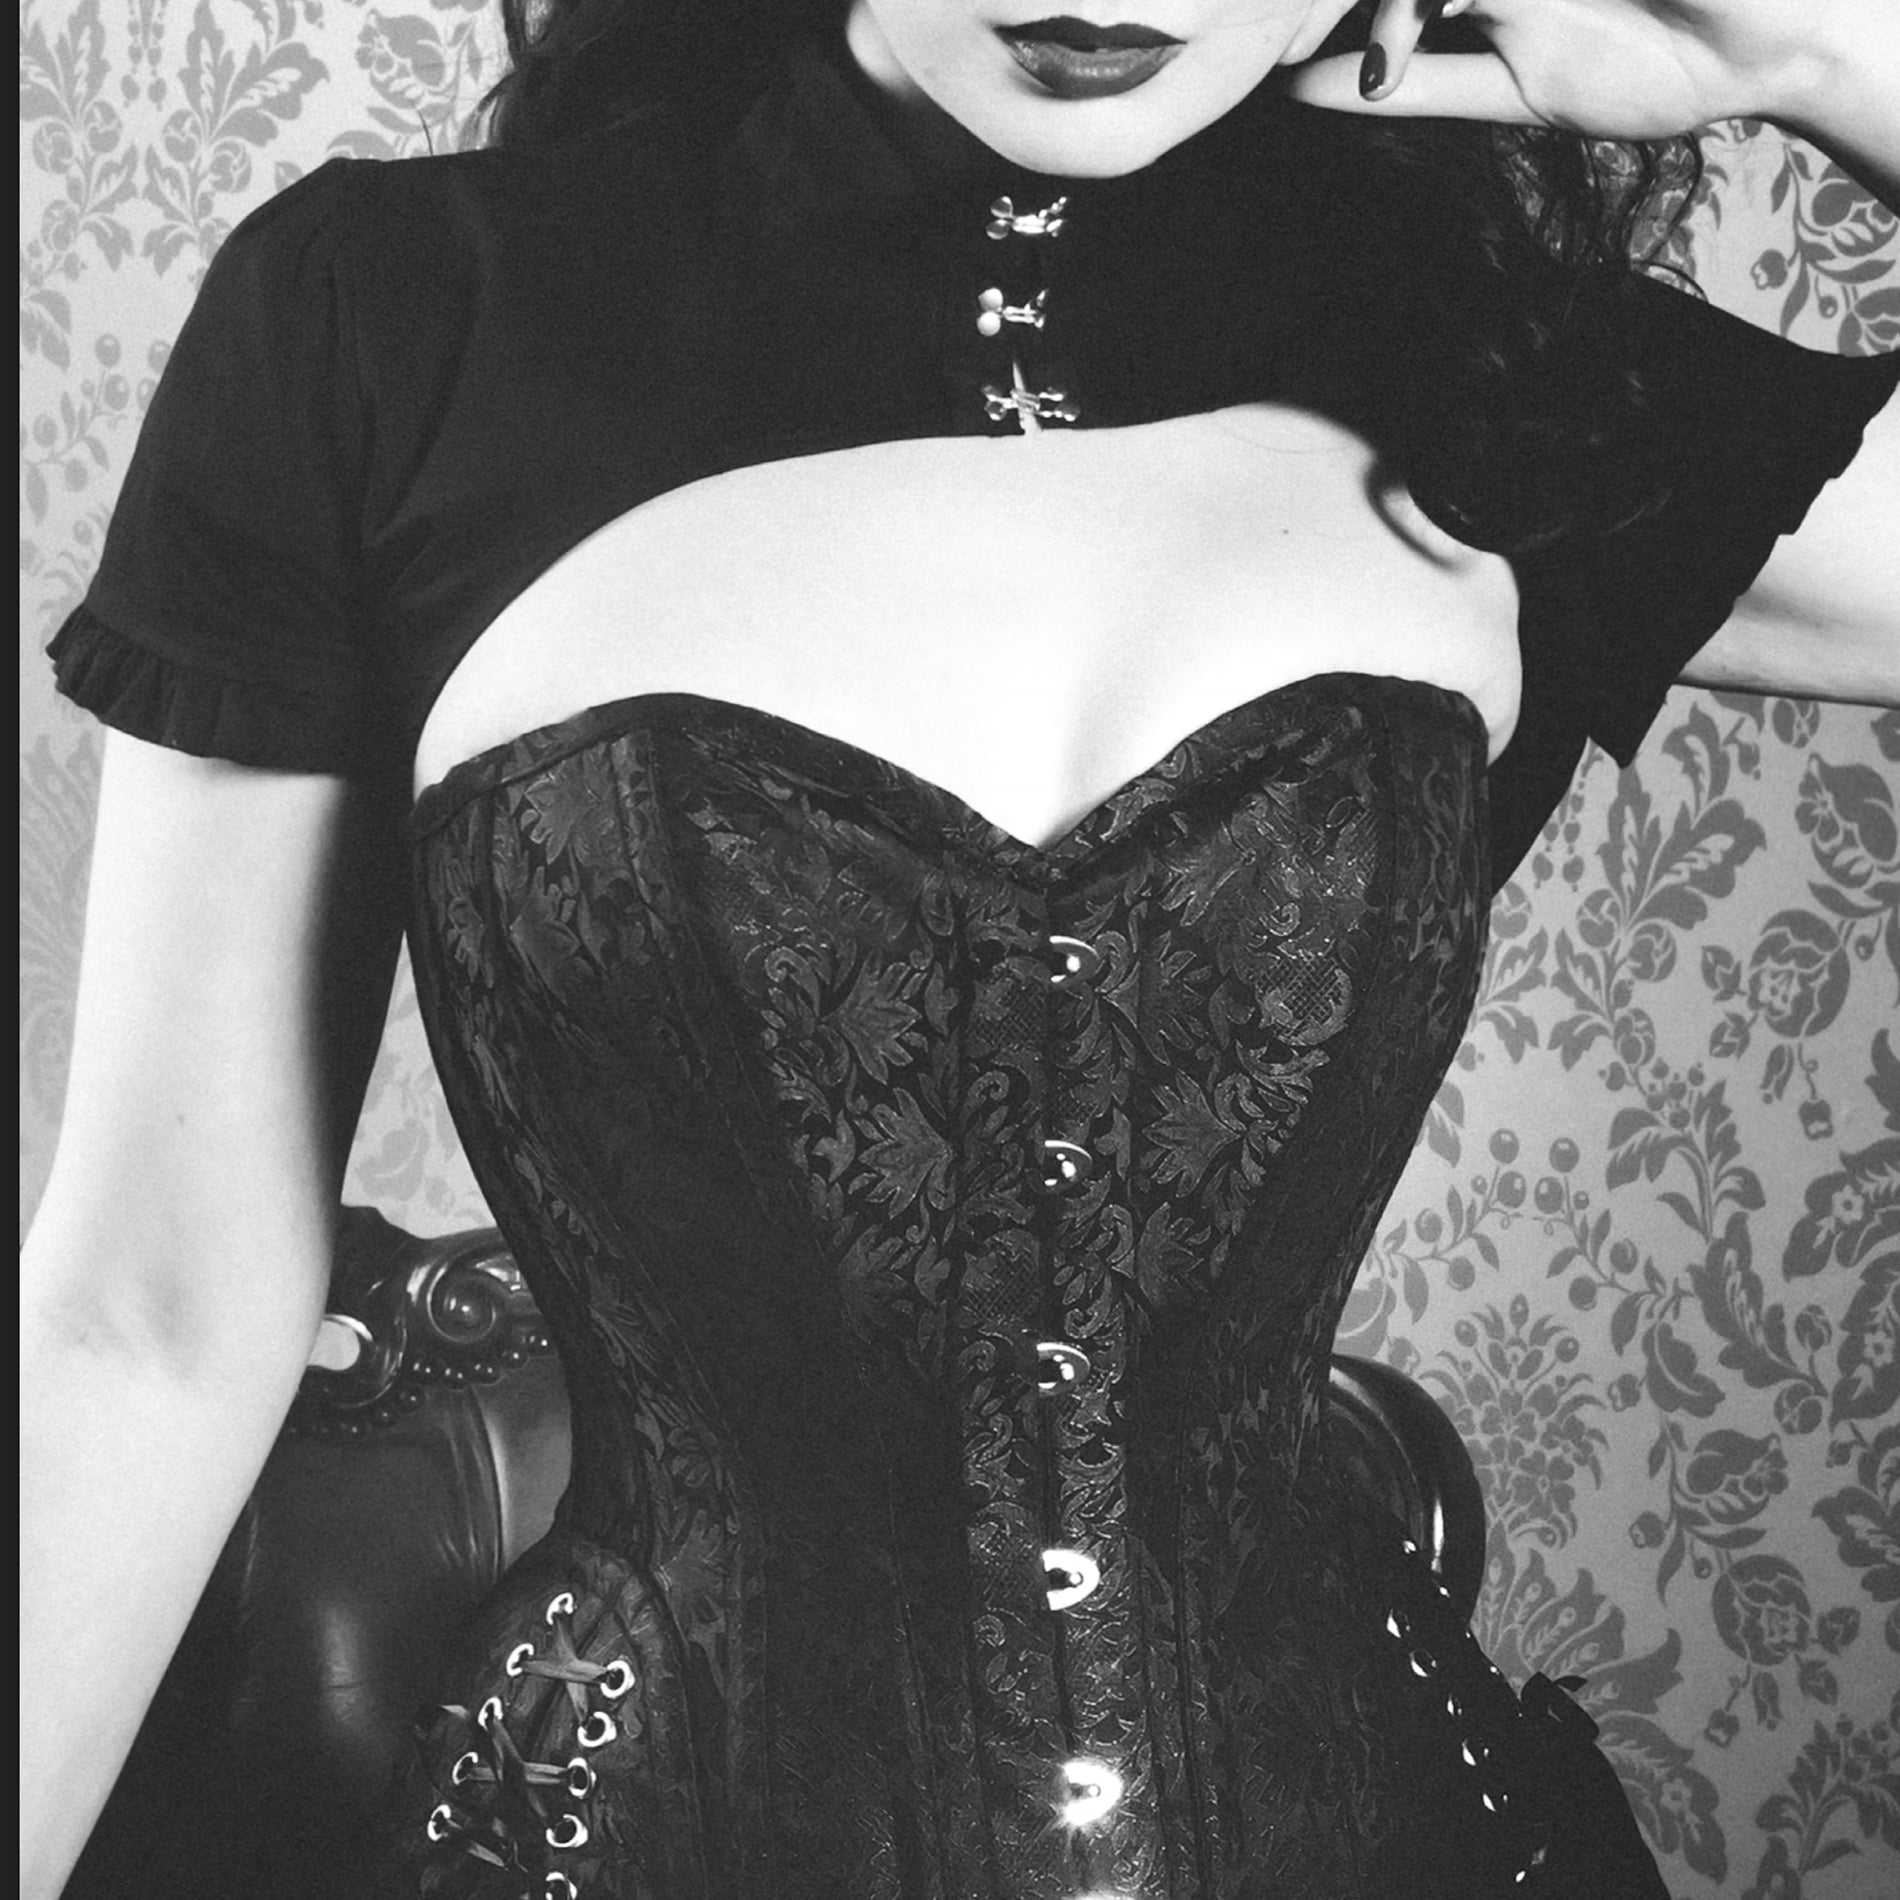 When You Wear A Corset Every Day, This Is What Happens To Your Body